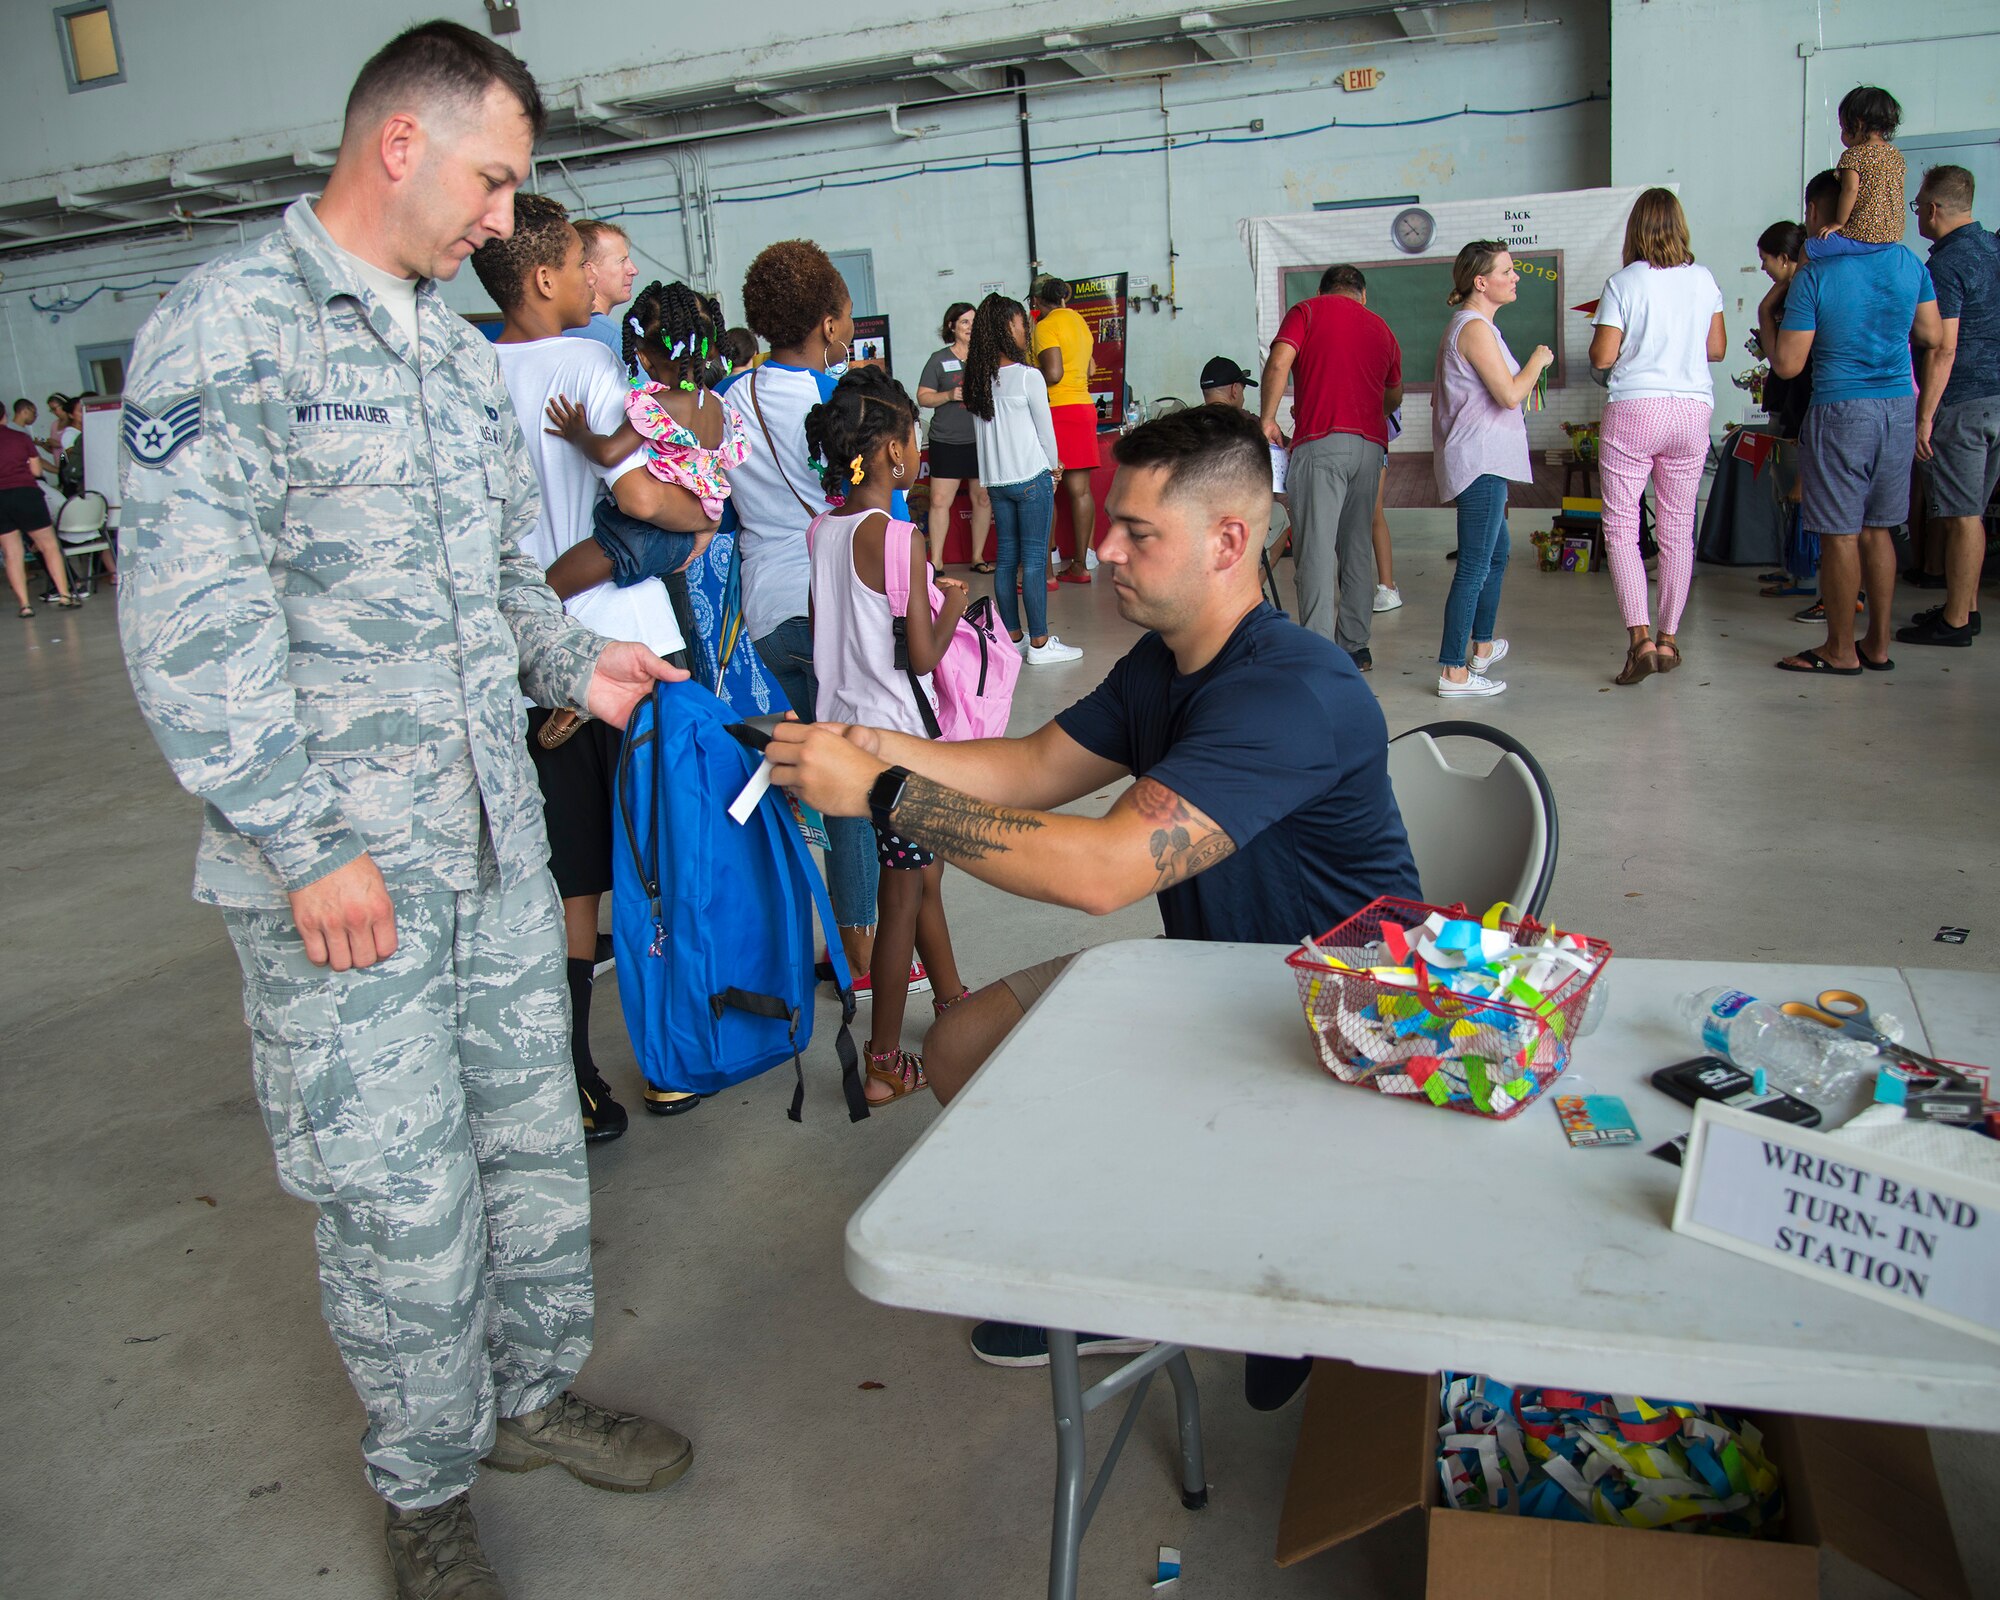 U.S. Air Force Senior Airman Jason Wisman, a 6th Aircraft Maintenance Squadron crew chief, cuts a wrist band off a backpack for U.S Air Force Staff Sgt. David Wittenauer, a 927th Security Forces Squadron defender, at a Back to School Info Fair hosted by the 6th Force Support Squadron at MacDill Air Force Base, Fla., Aug. 3, 2019.